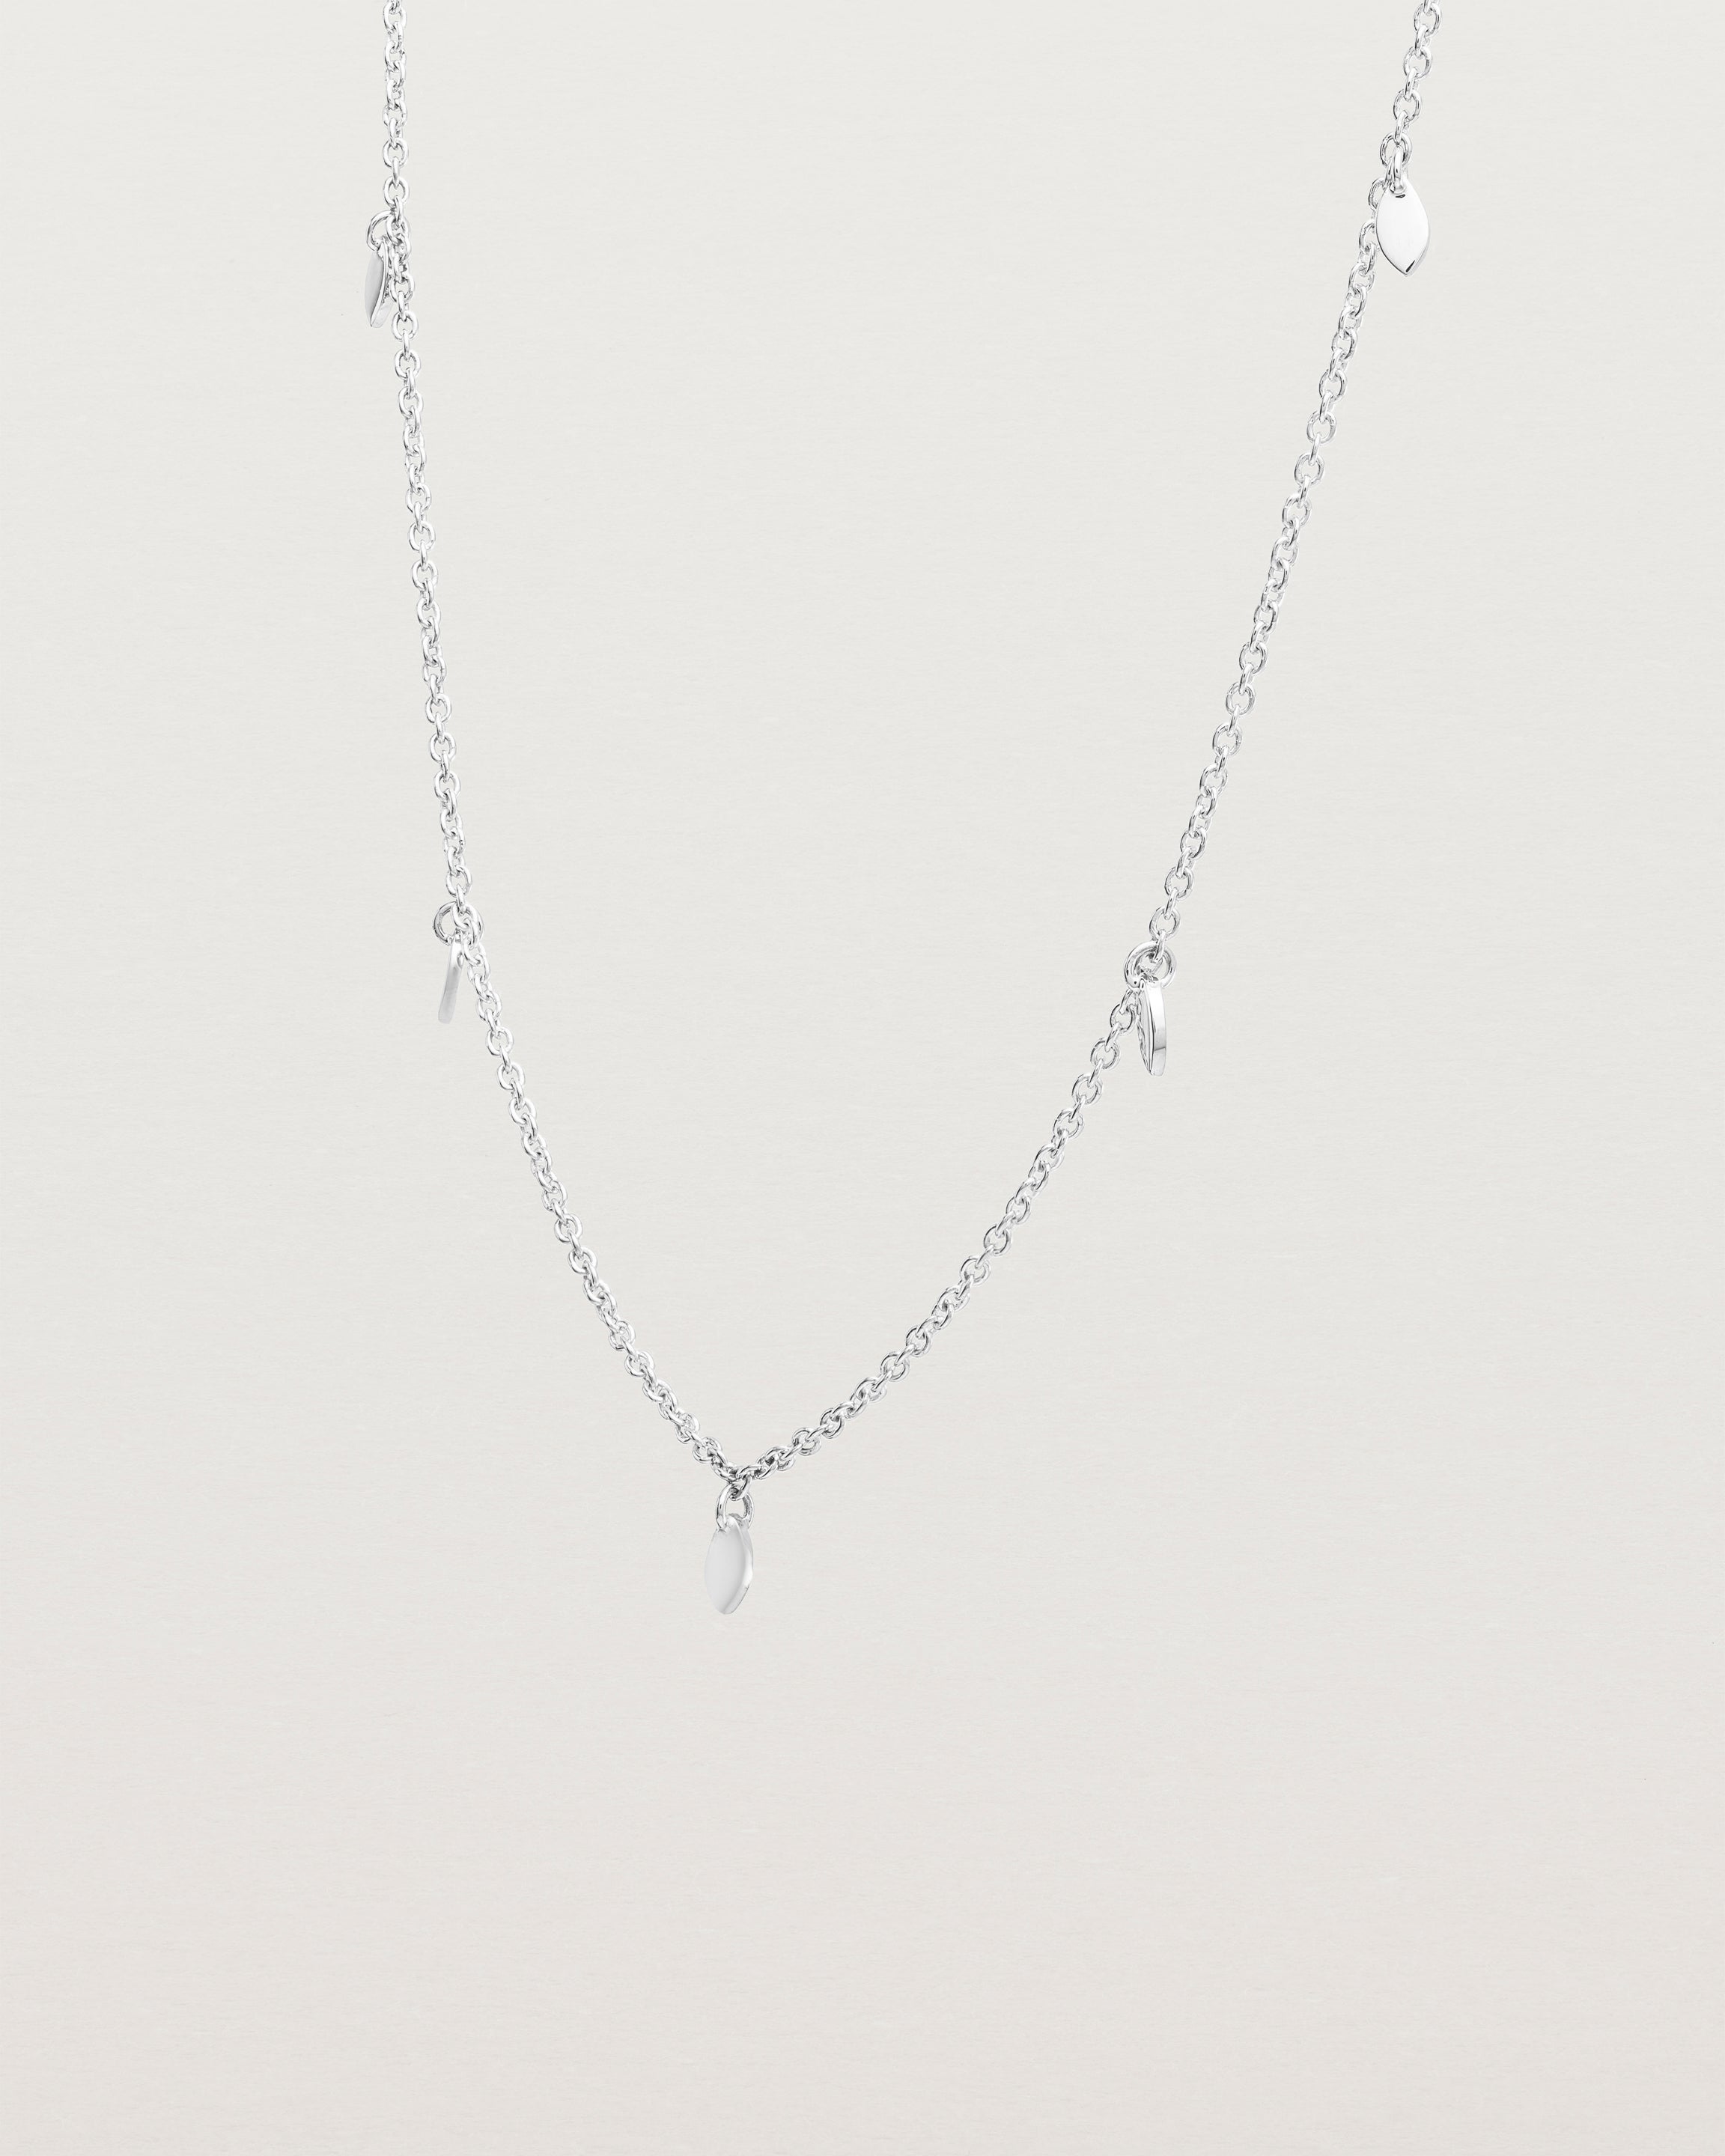 Angled view of the Daisy Chain Necklace | Sterling Silver.